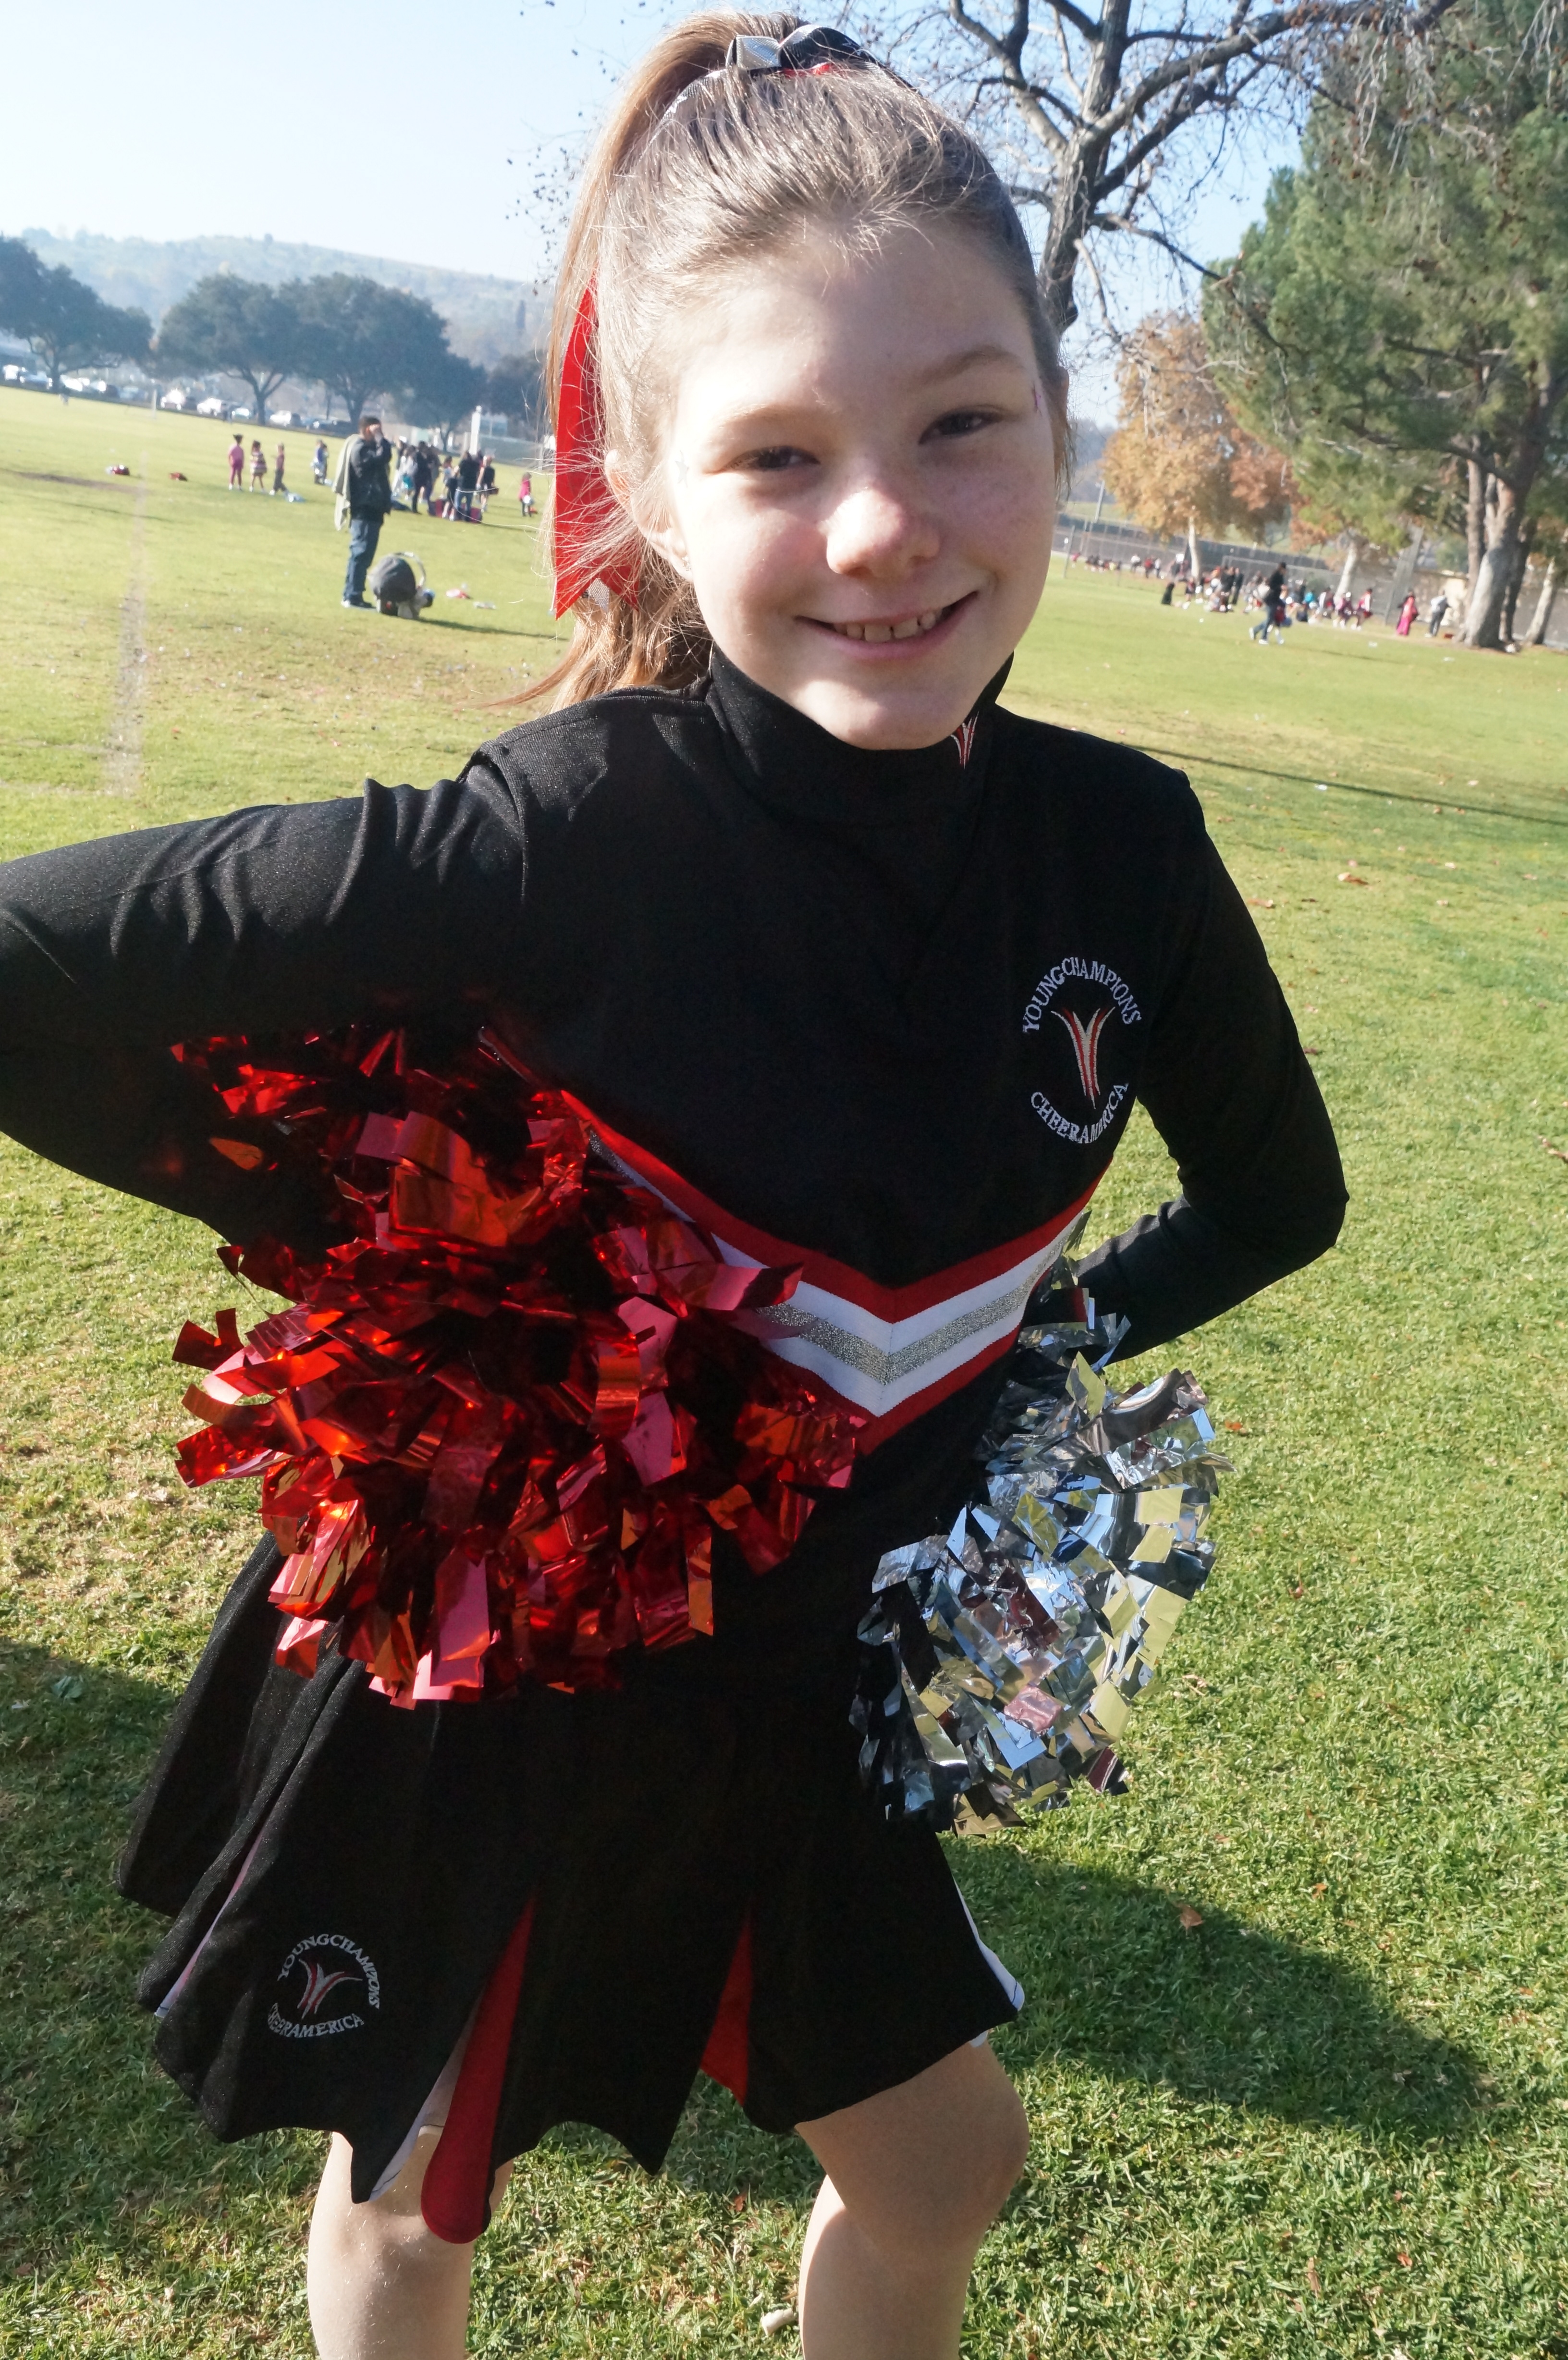 Cheer competition